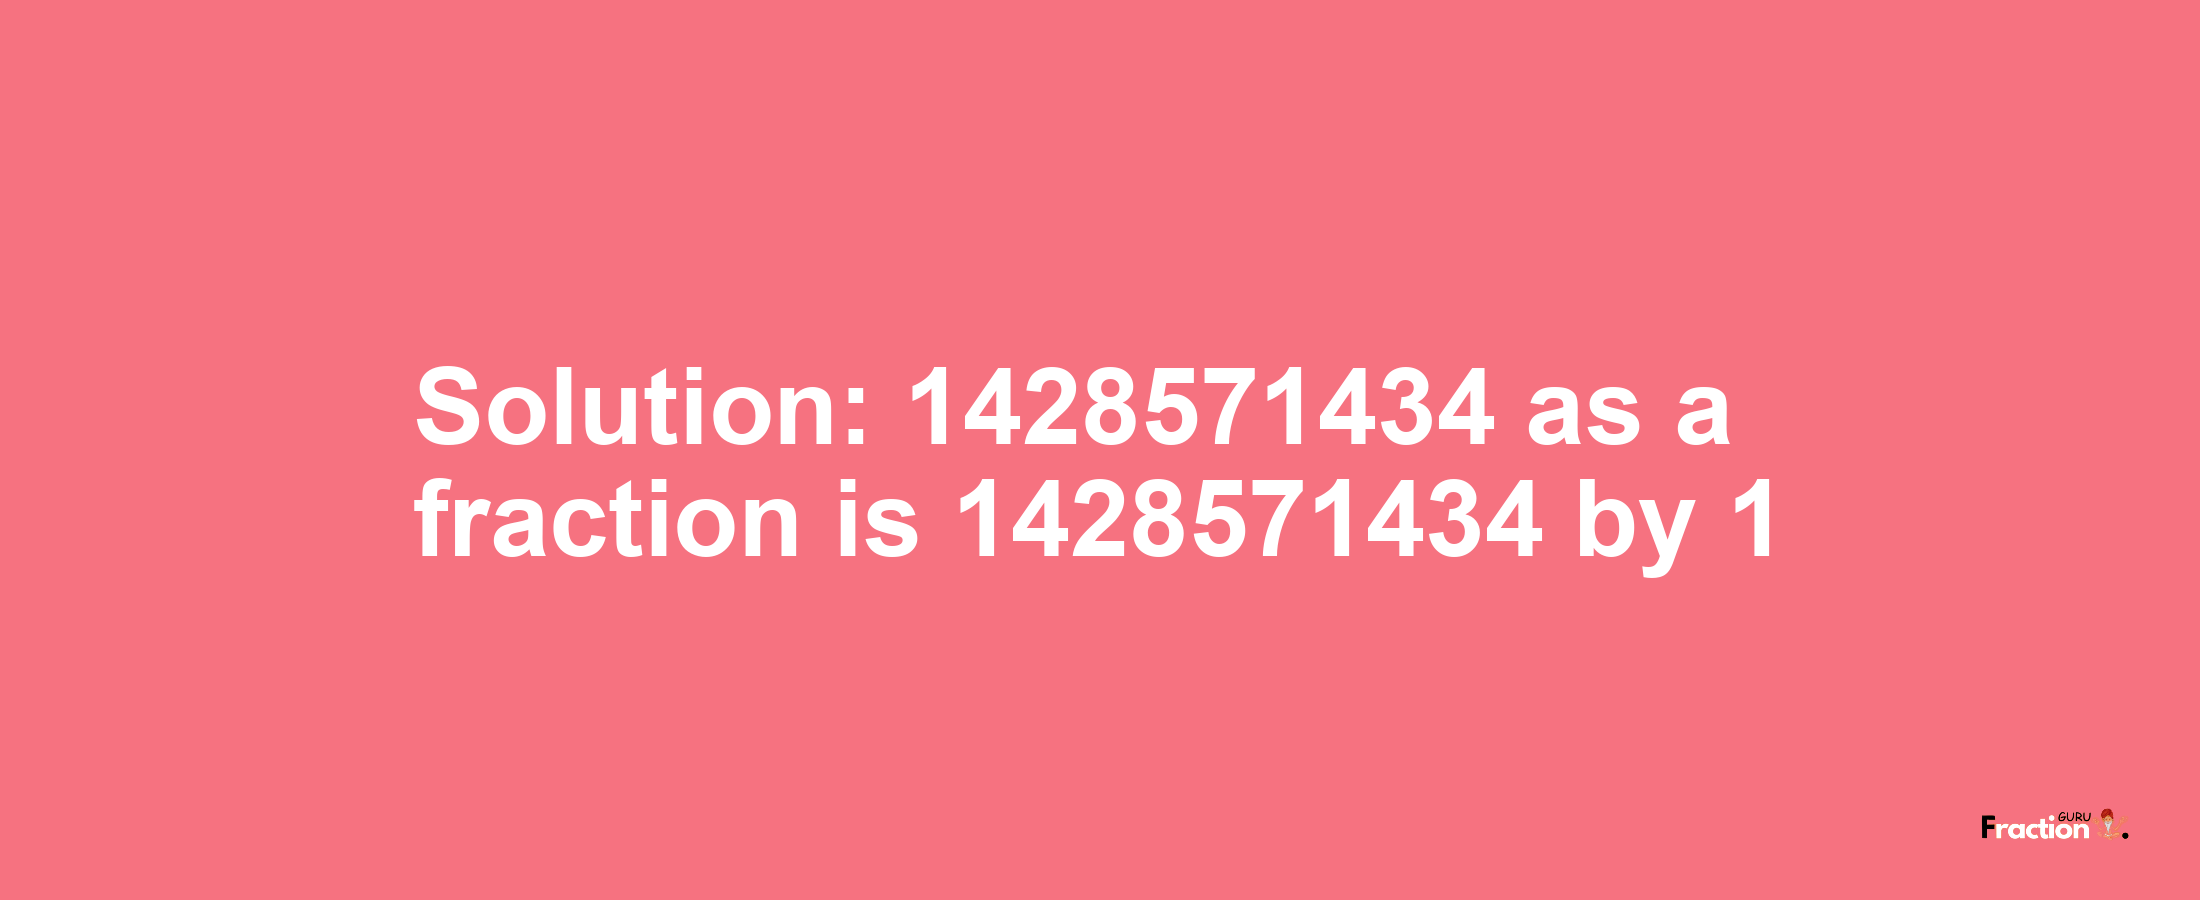 Solution:1428571434 as a fraction is 1428571434/1